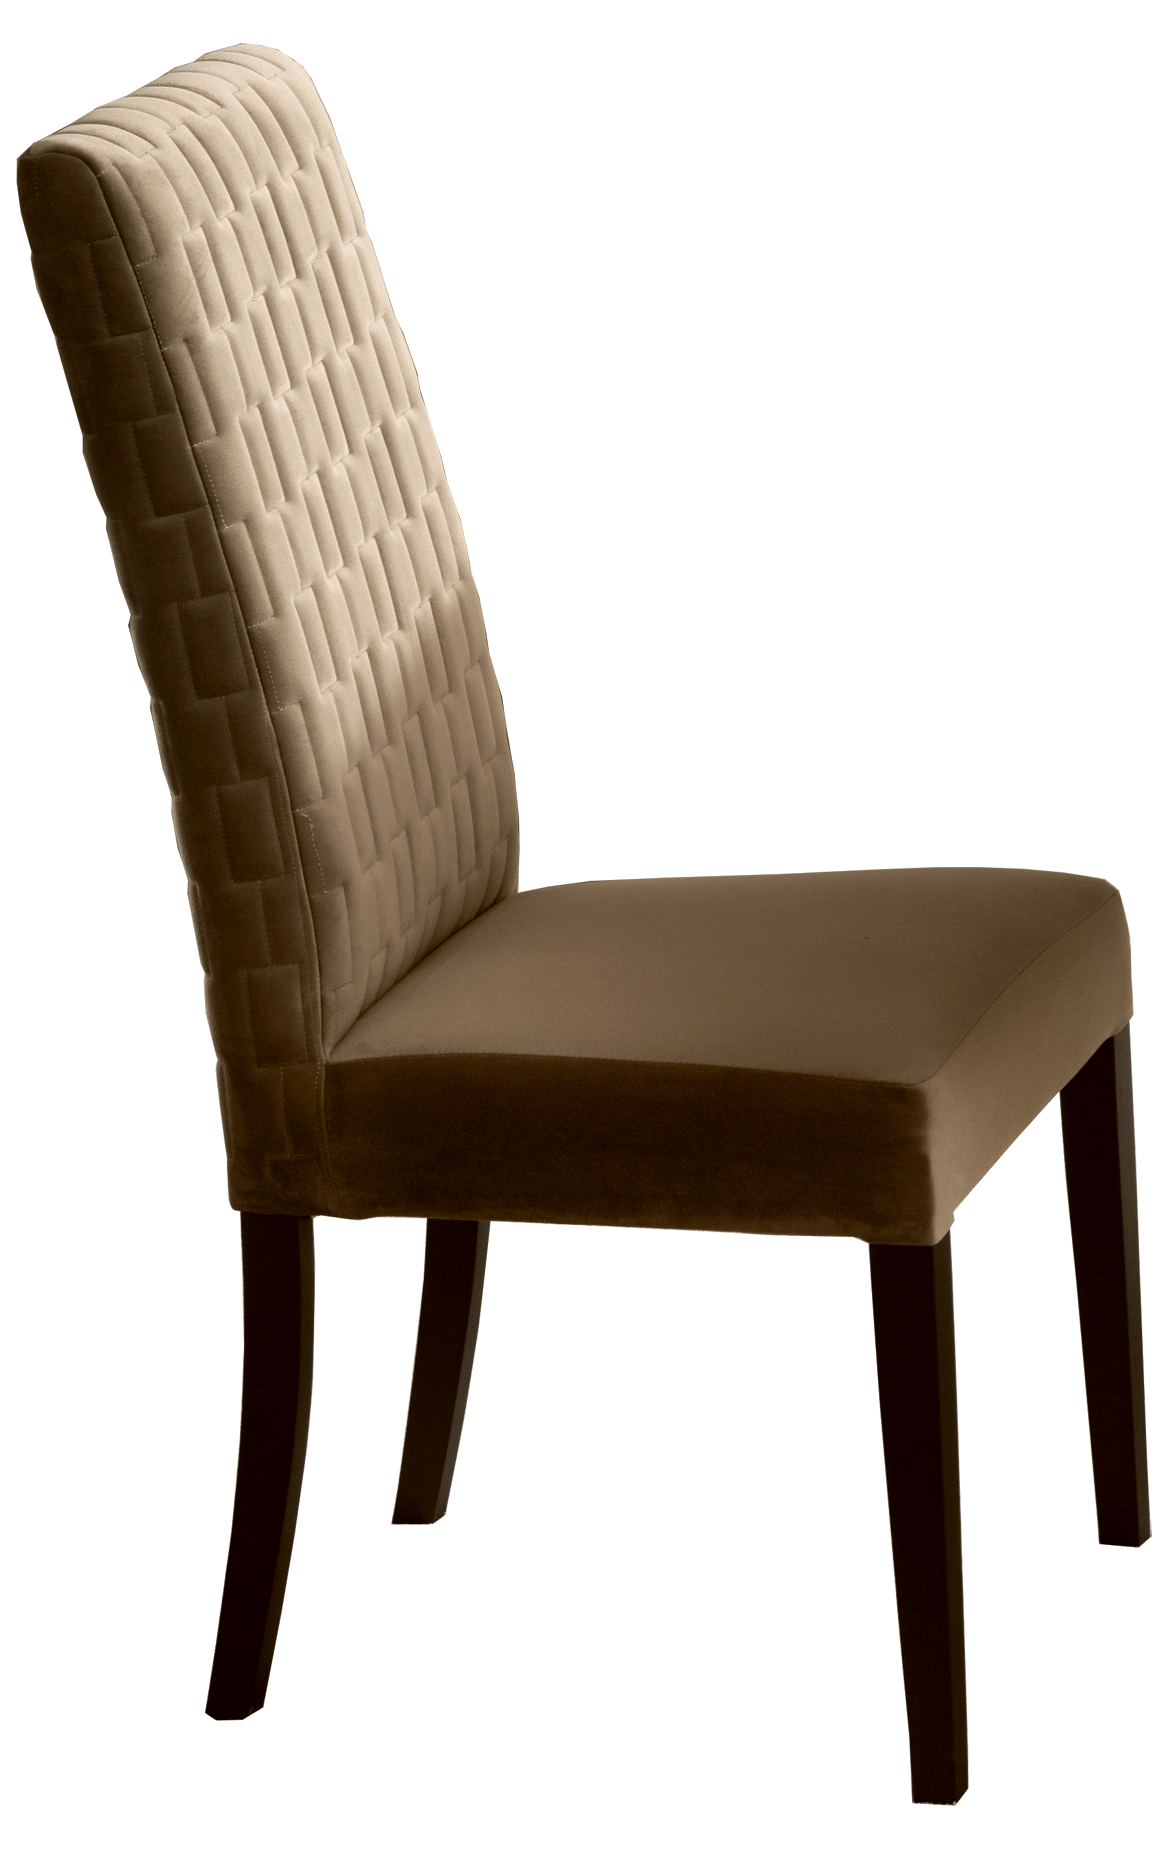 Brands Garcia Laurel & Hardy Tables Poesia Dining Chair by Arredoclassic